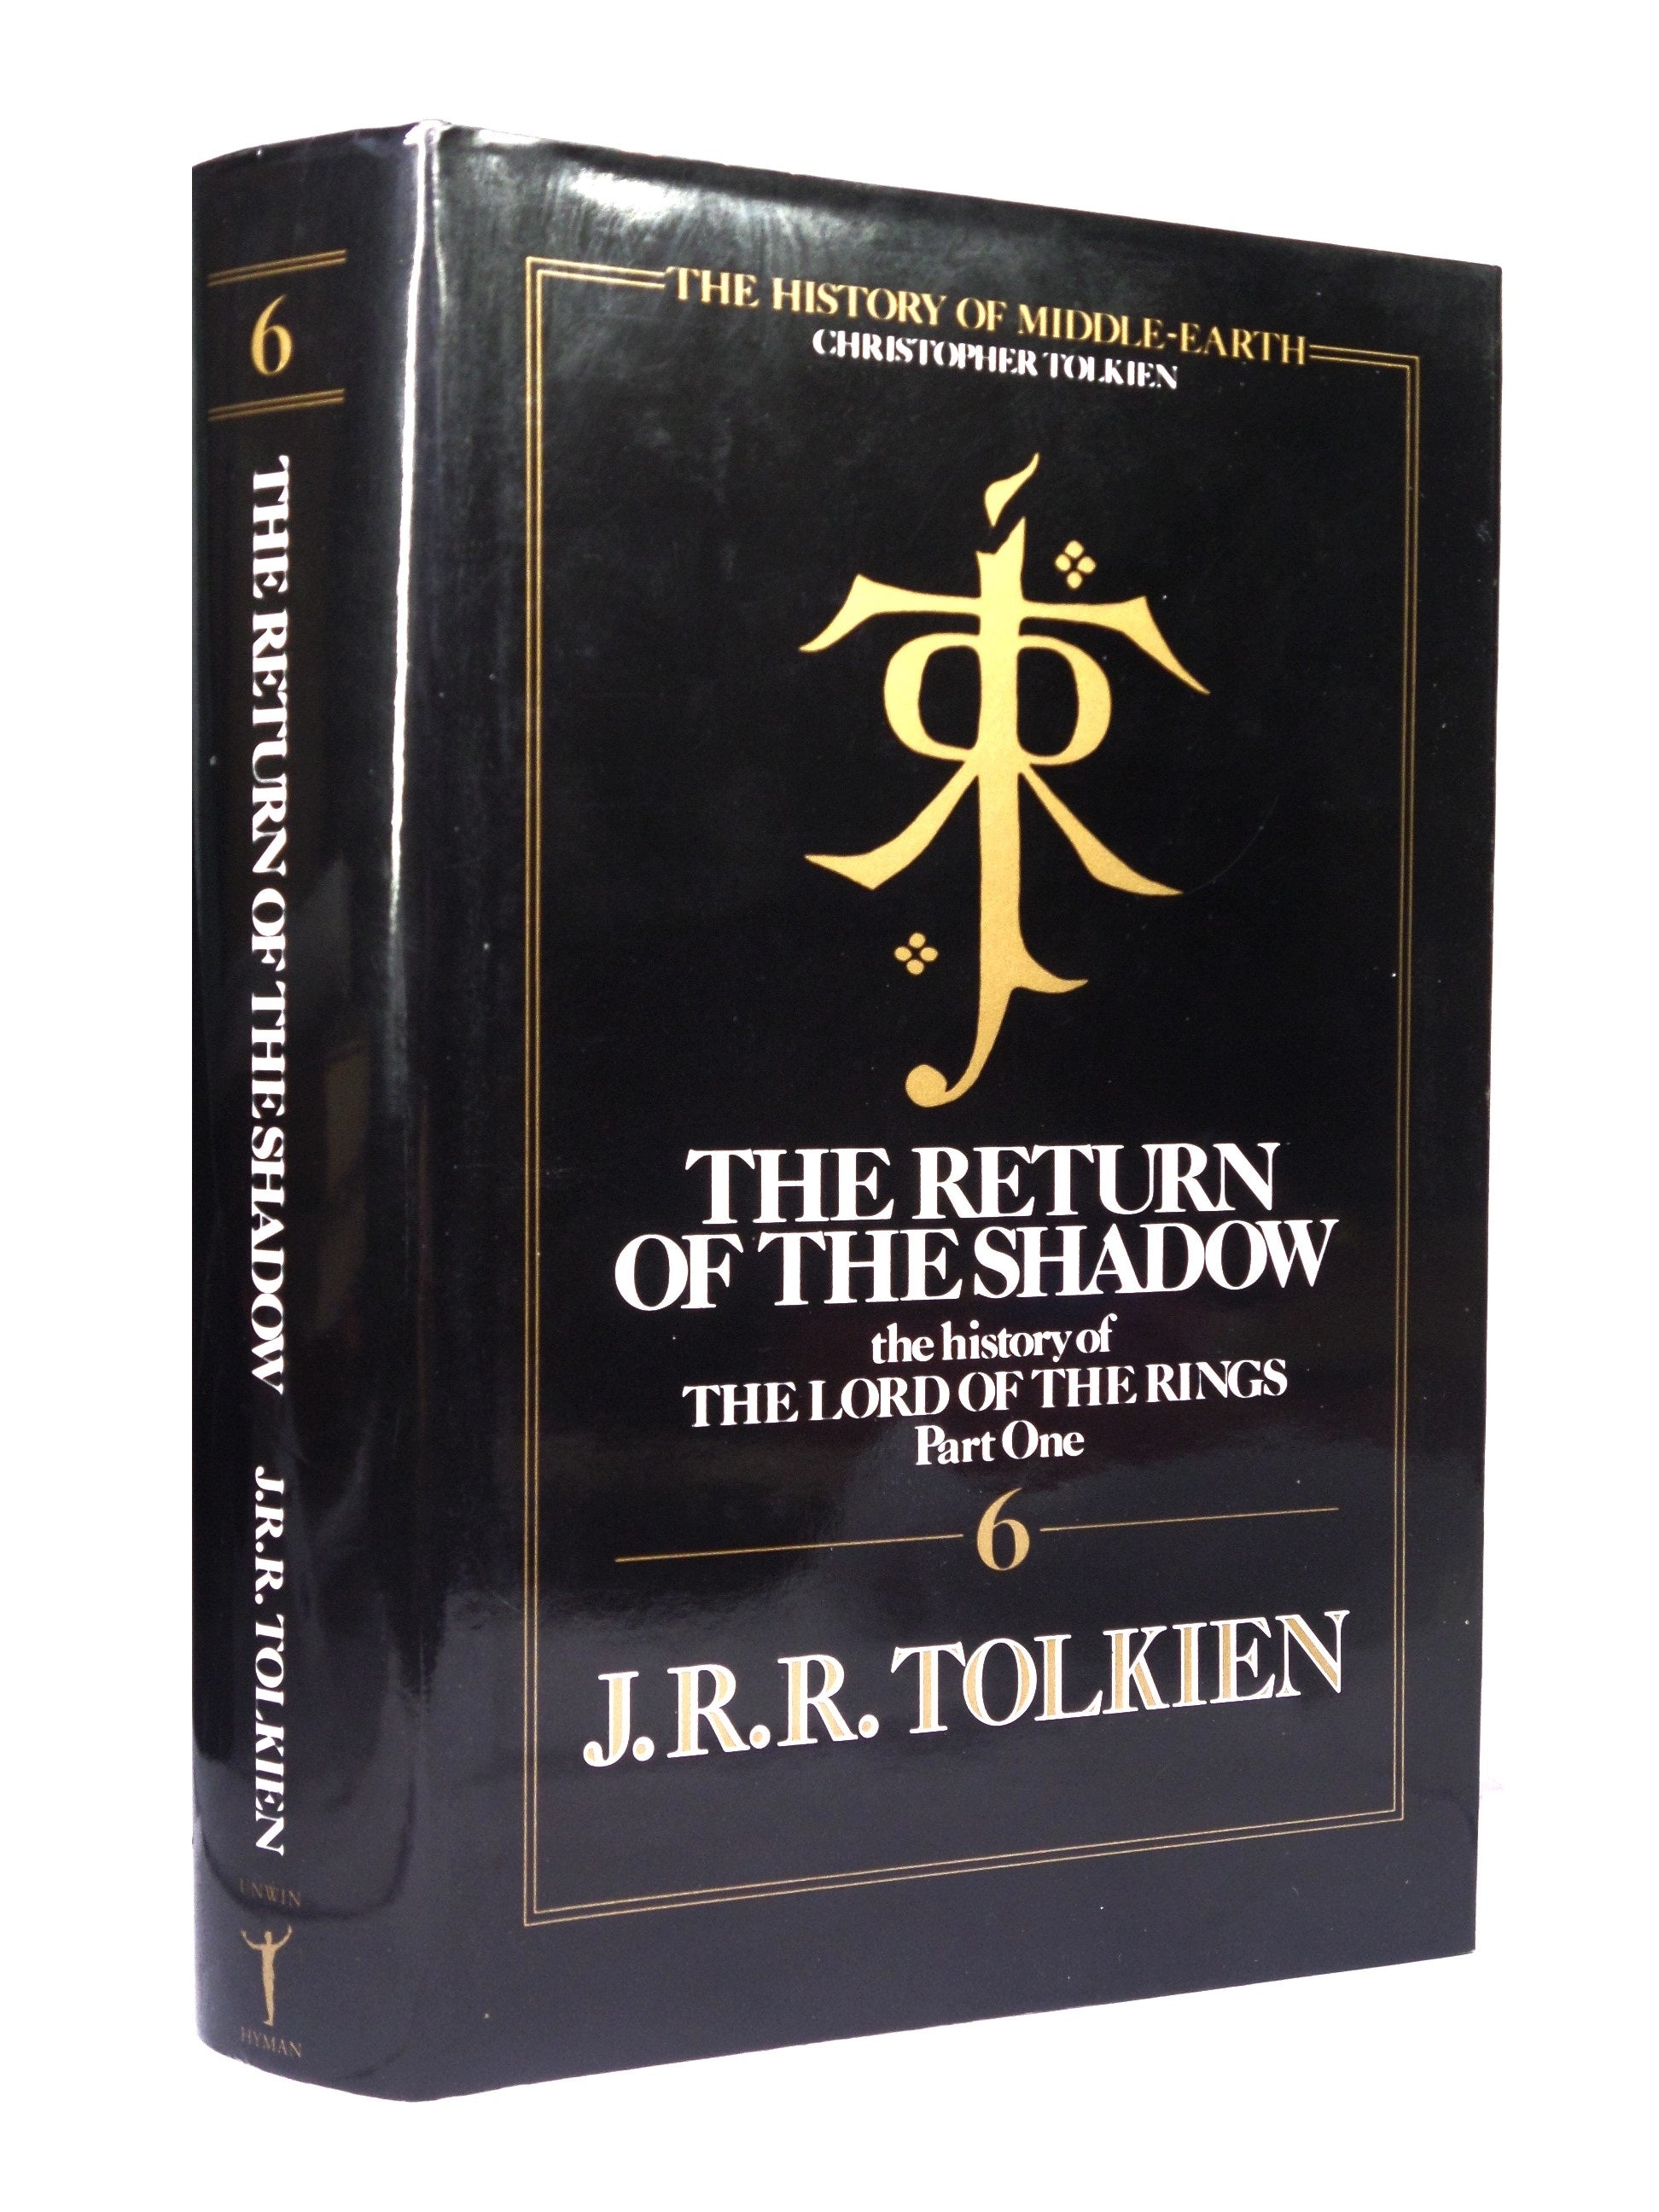 THE RETURN OF THE SHADOW BY J.R.R. TOLKIEN 1989 HARDCOVER